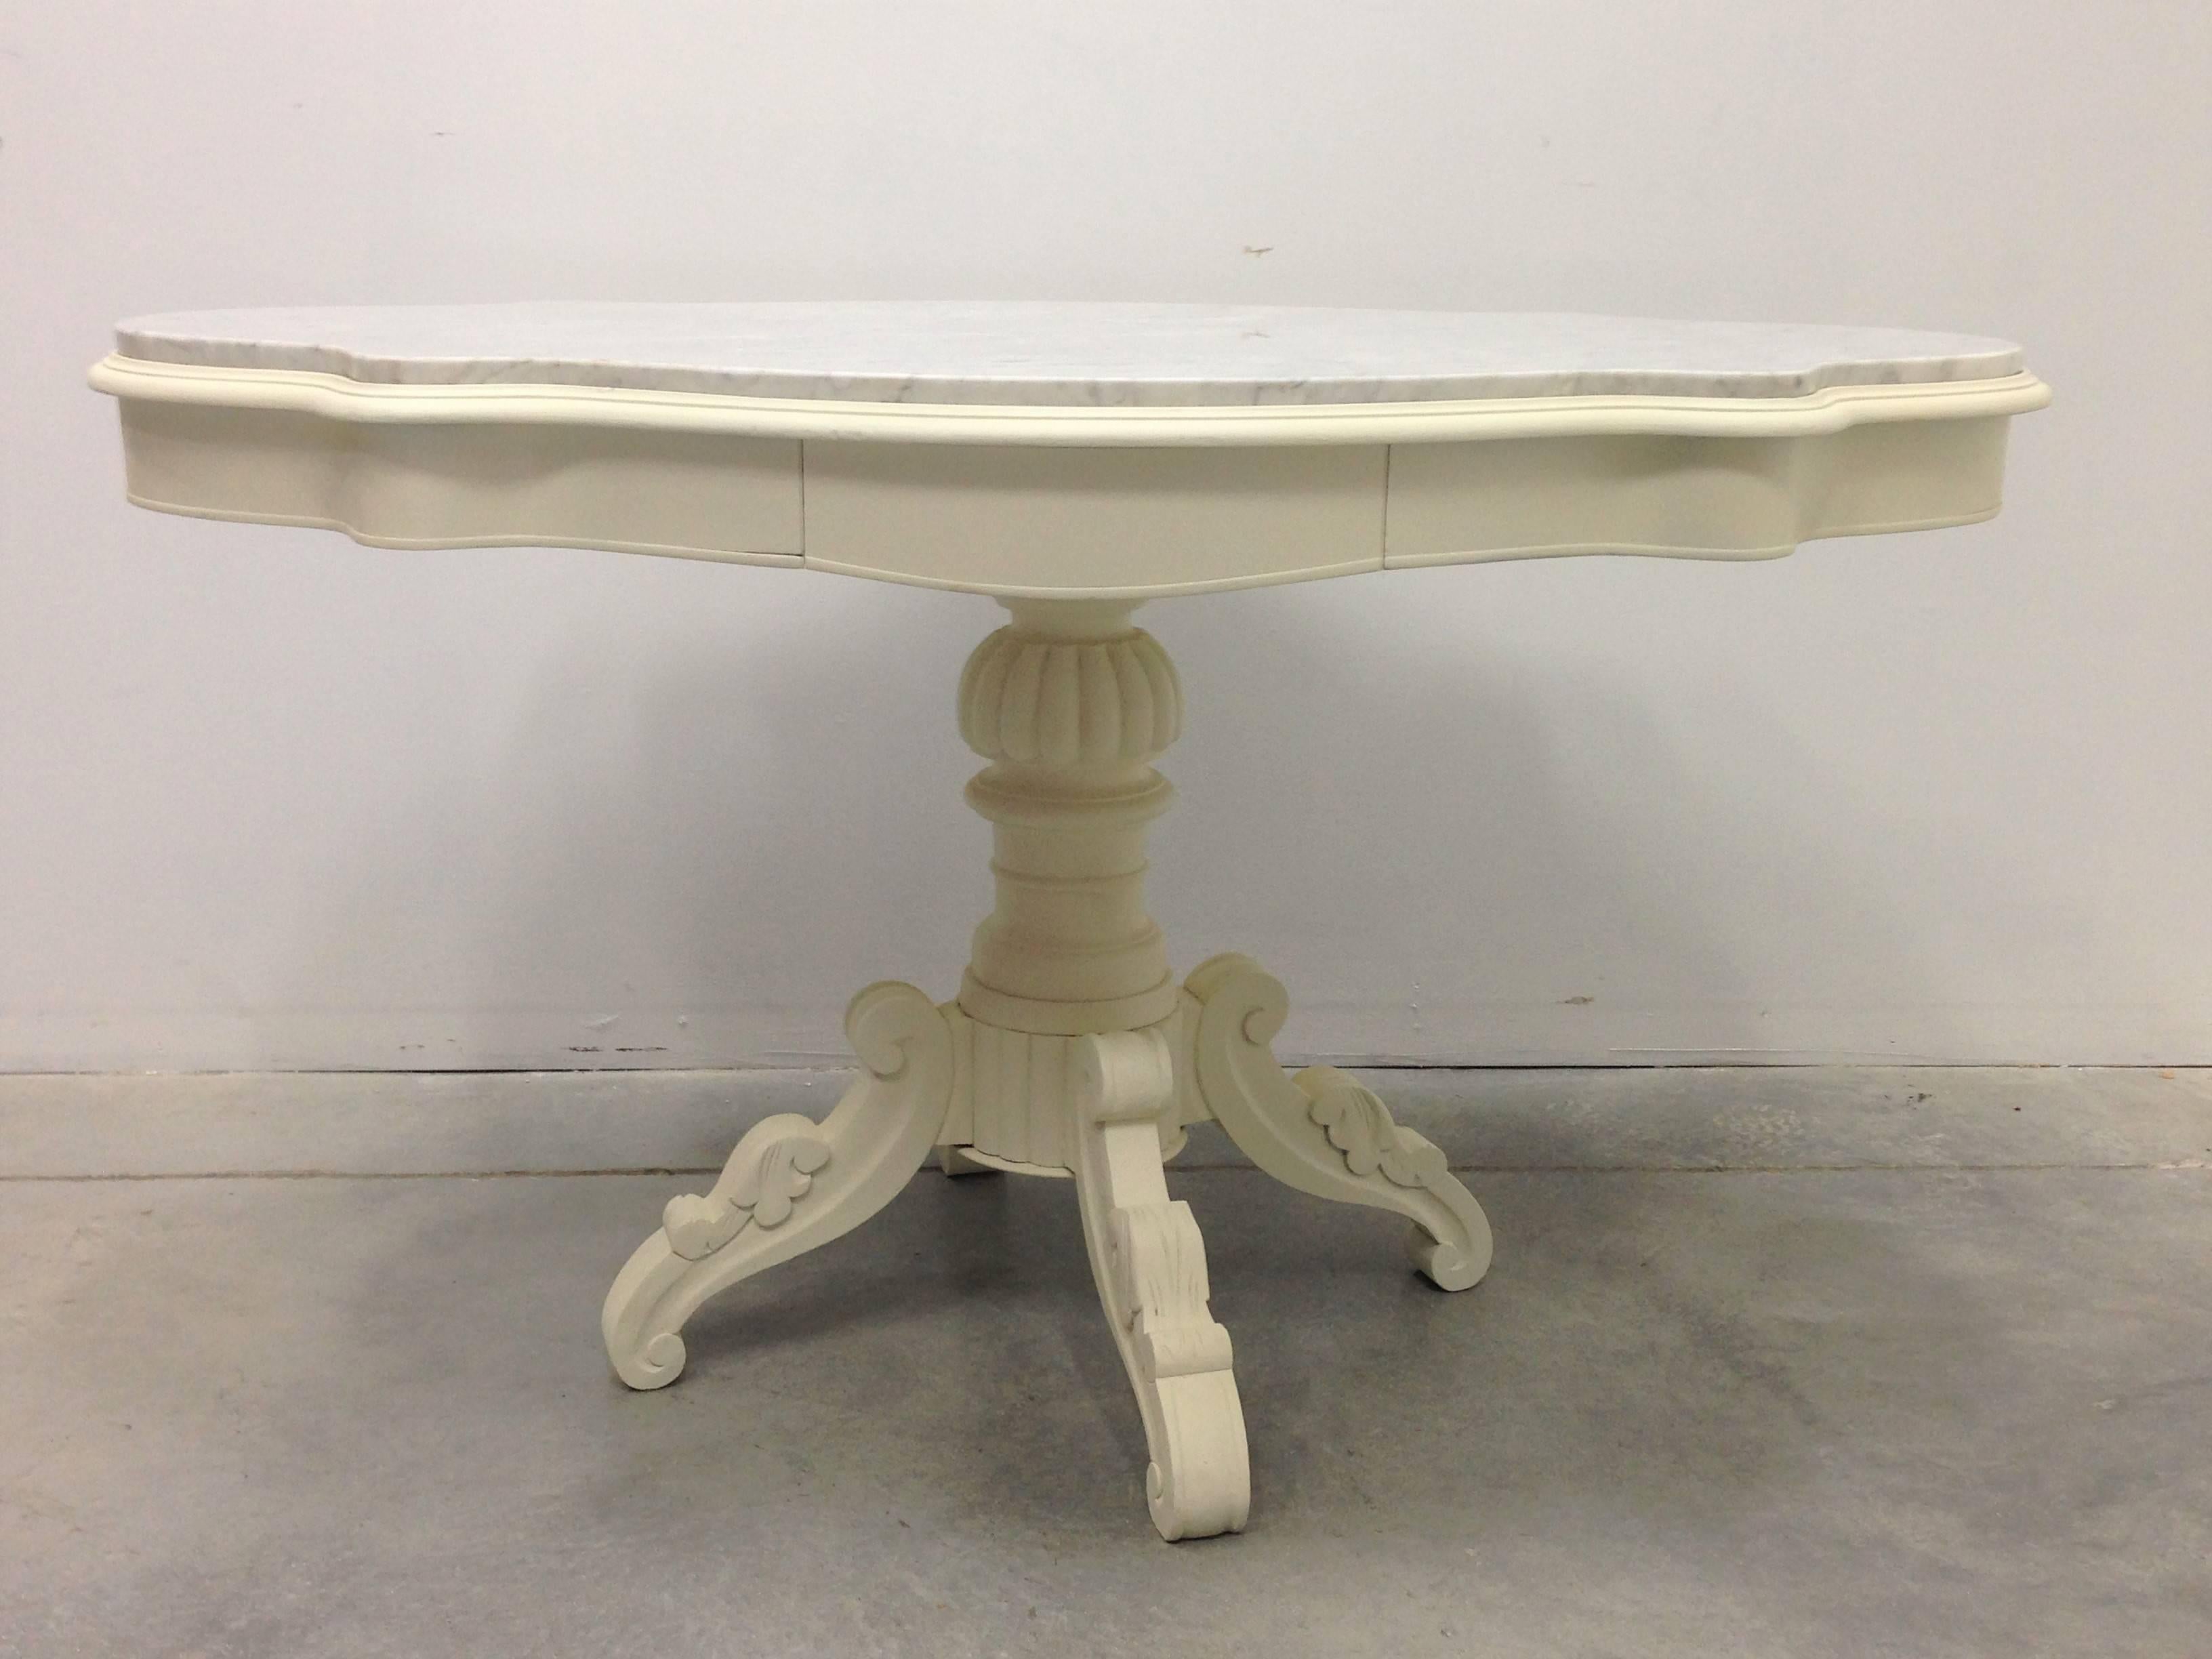 19th century Swedish pedestal table.

A charming oval pedestal table with base supported by beautifully carved four legs, 
Sweden, circa 1840-1850.

Charming Belgian table has a marble oval top and apron.

Clear matte finish seals the